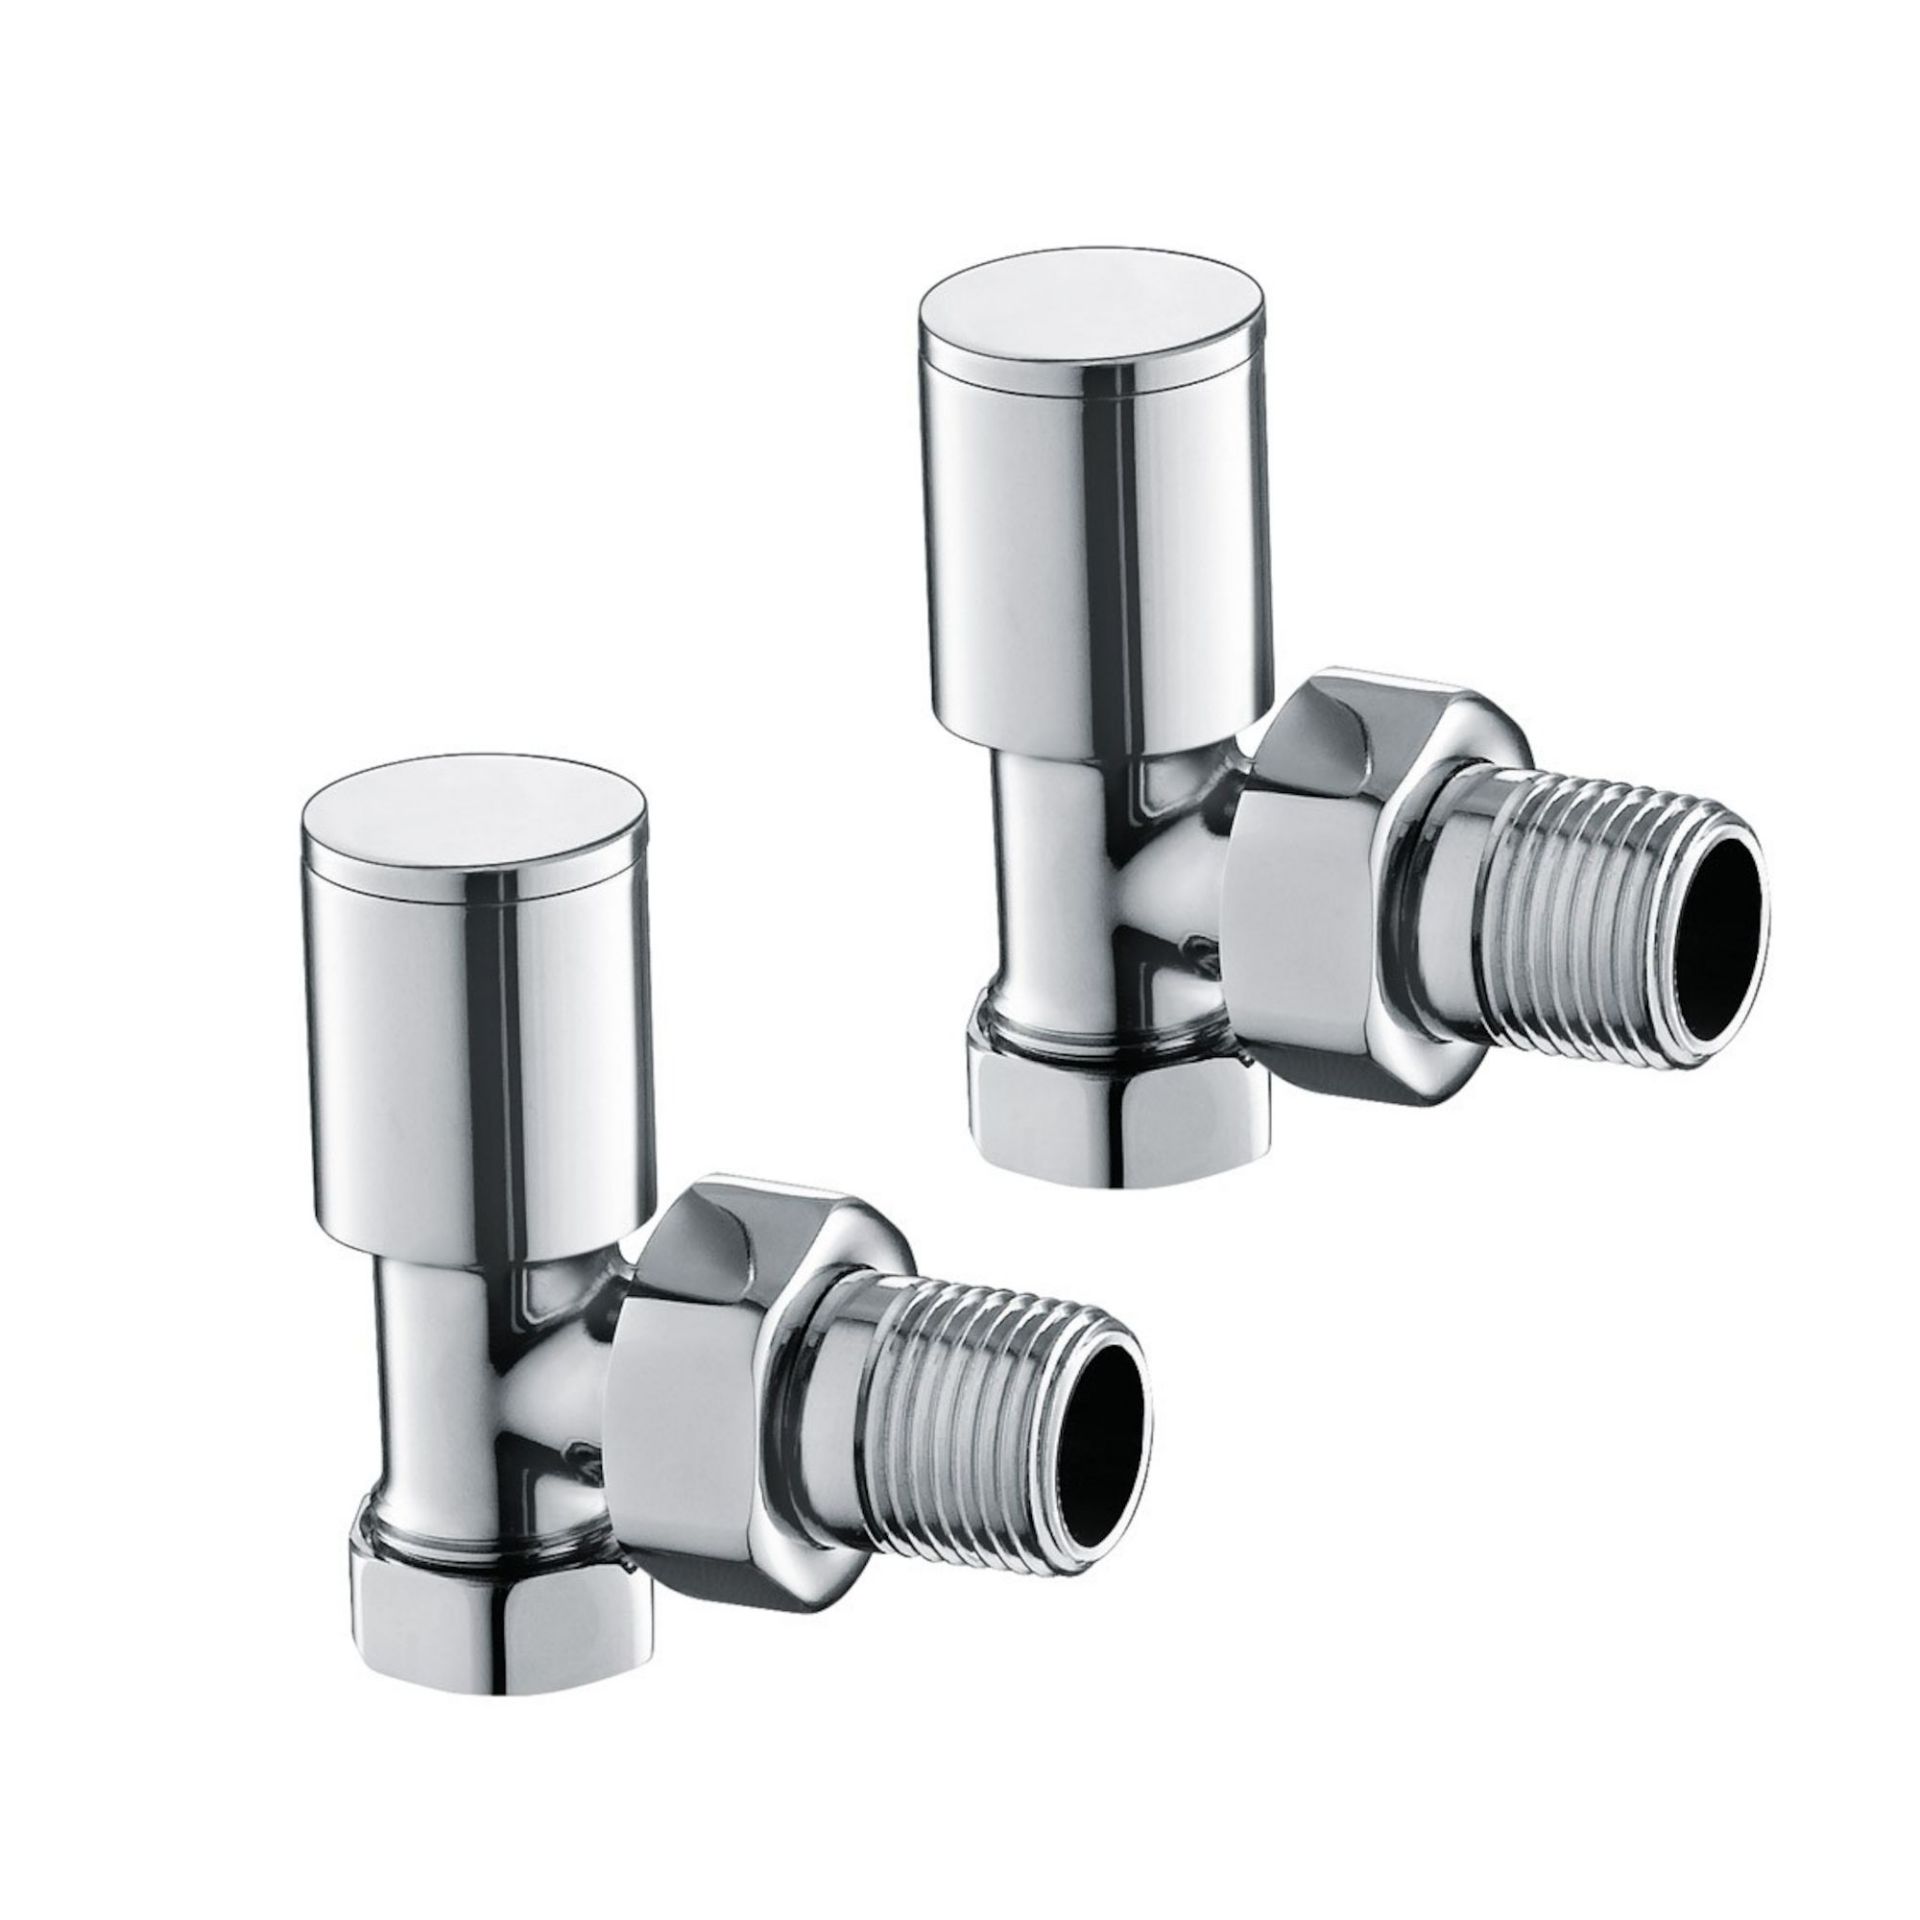 (V20) 15mm Standard Connection Angled Radiator Valves - Heavy Duty Polished Chrome Plated Brass. - Image 2 of 3